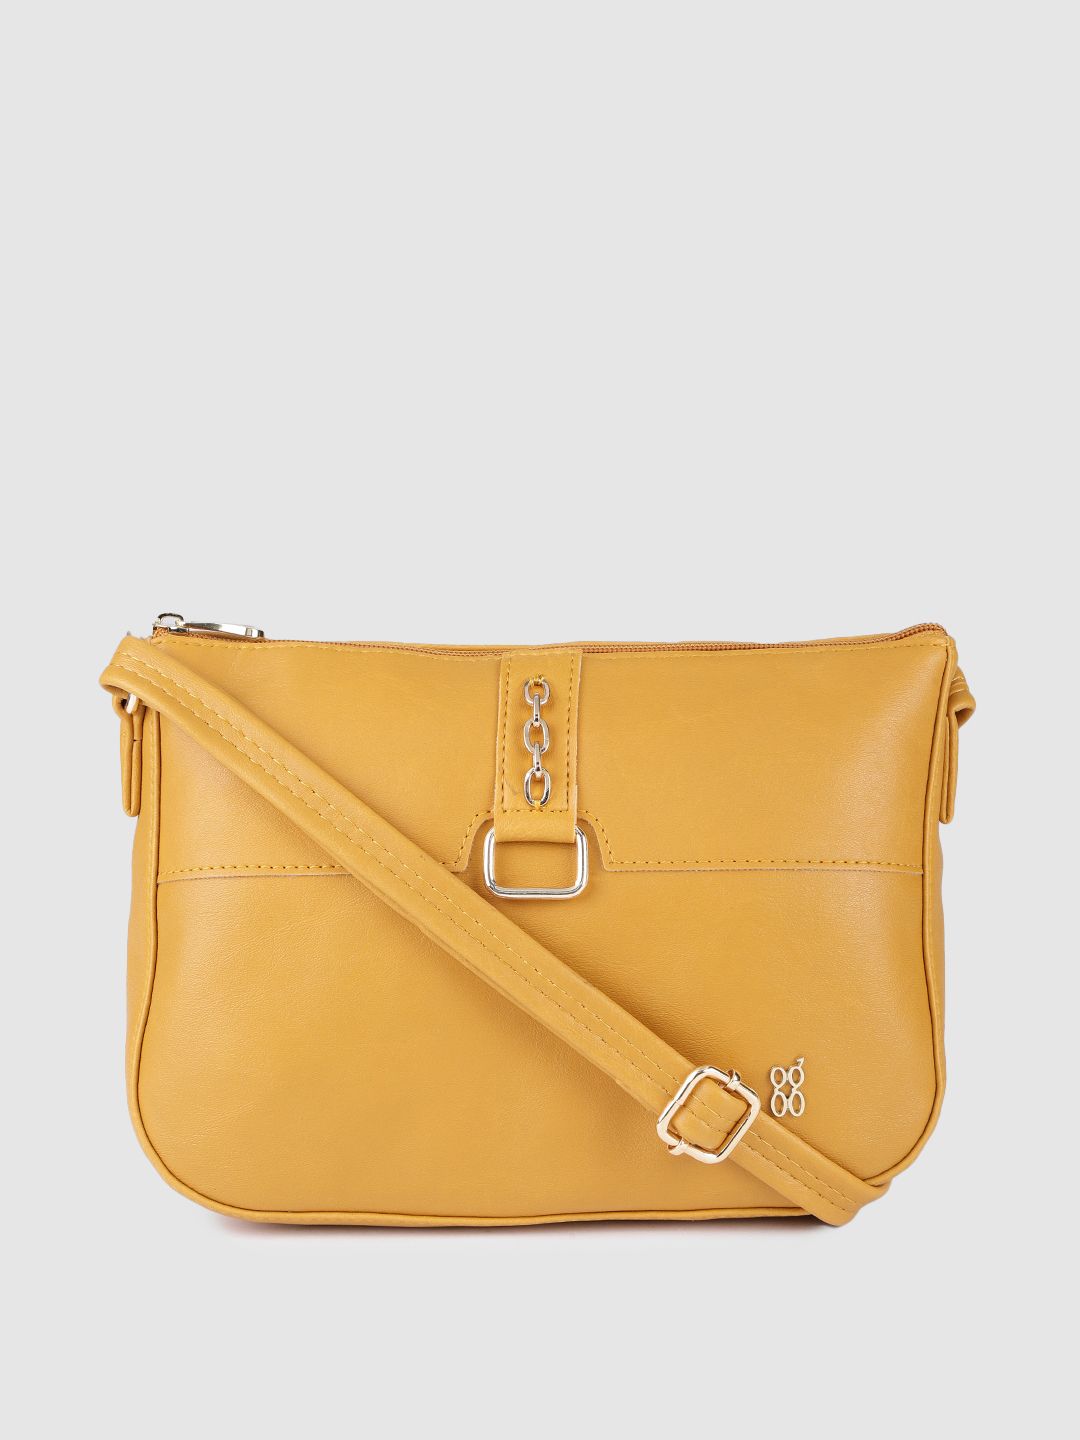 Baggit Yellow Structured Sling Bag Price in India